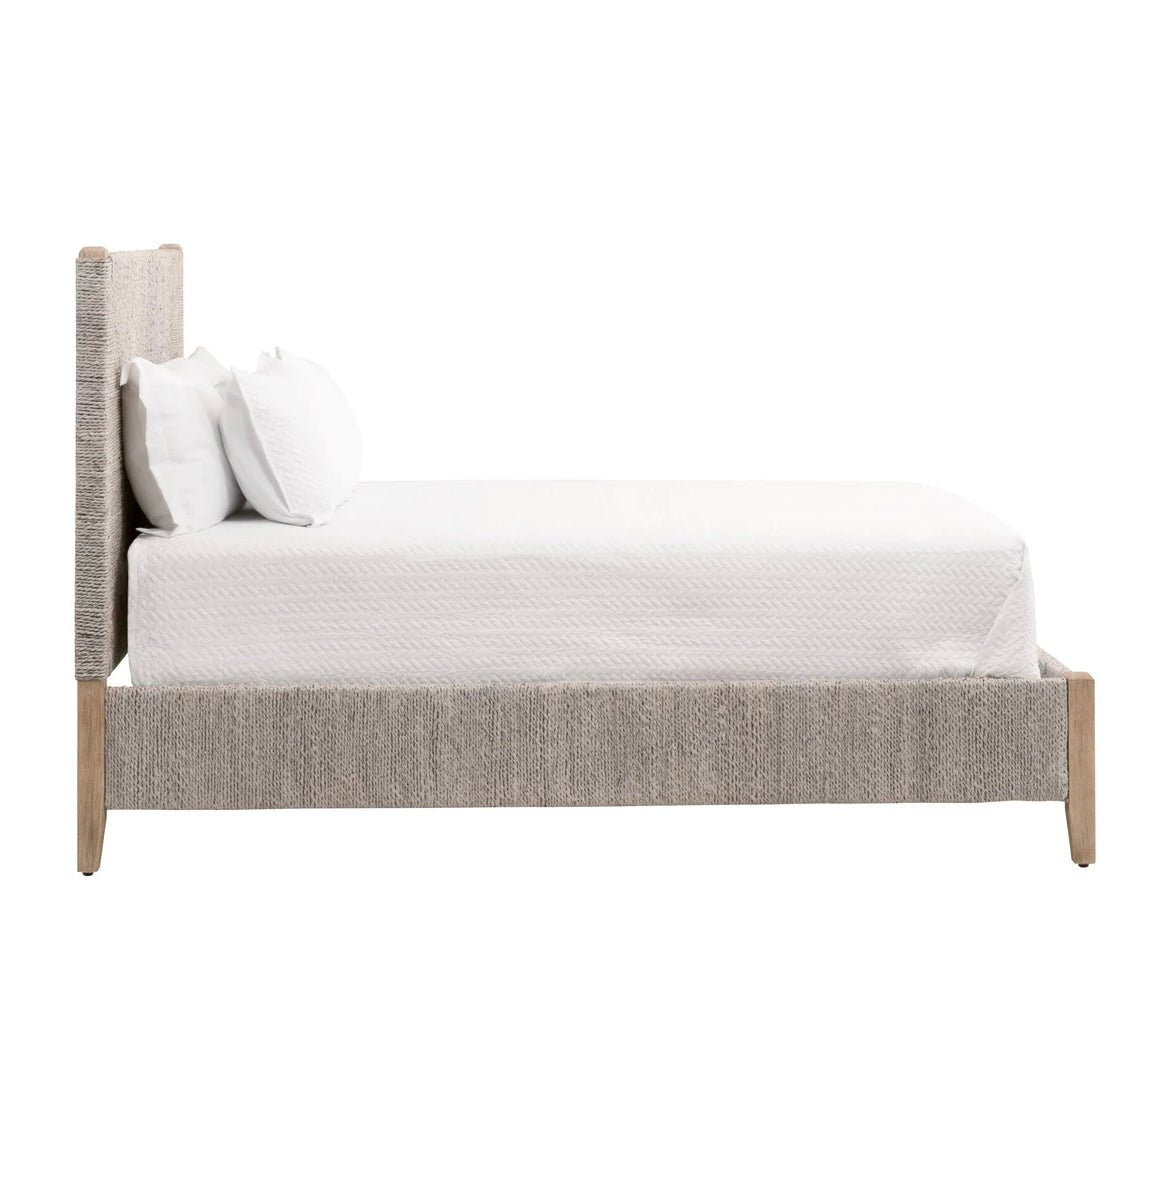 ‘Malay’ Bed (Queen) - EcoLuxe Furnishings